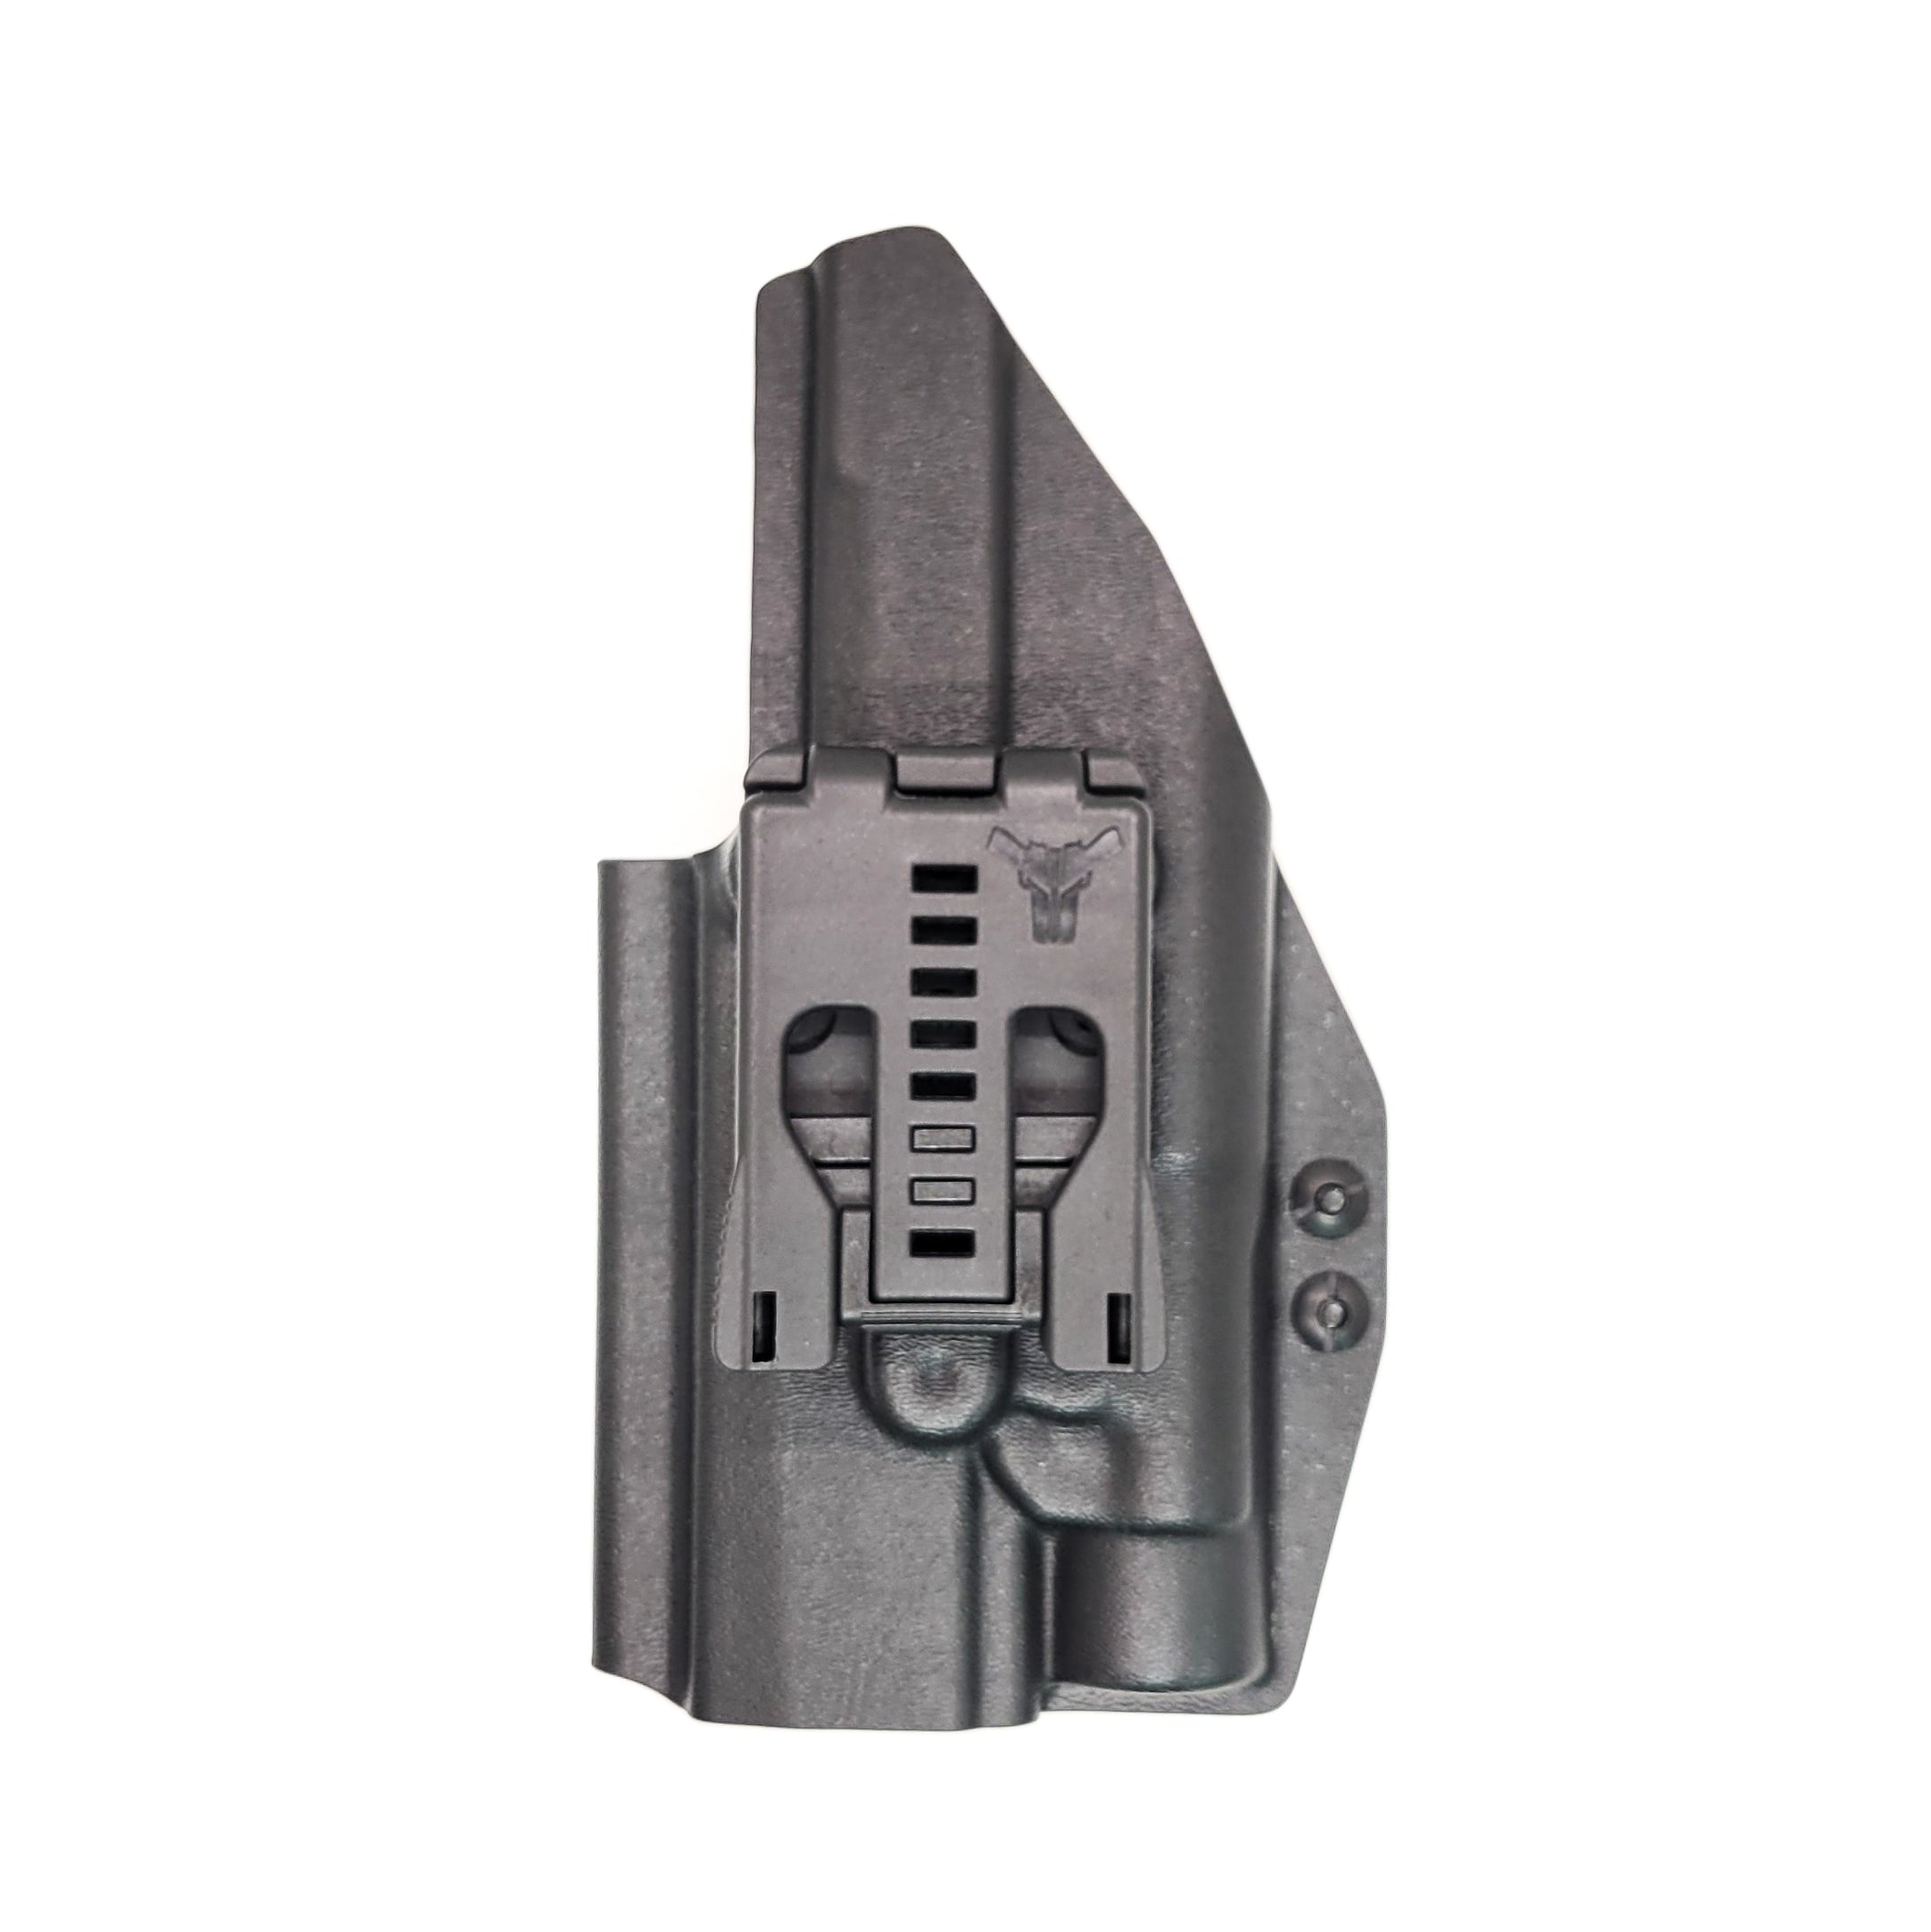 For the best, Outside Waistband Kydex Holster designed to fit the P320 AXG and AXG Pro with Streamlight TLR-1 or TLR-1HL weapon-mounted light and Align Tactical Thumb Rest Takedown Lever, shop Four Brothers Holsters.  The holster will accommodate the M17, M18, Carry, Compact, and X-Five models. Made in the USA TLR1HL 